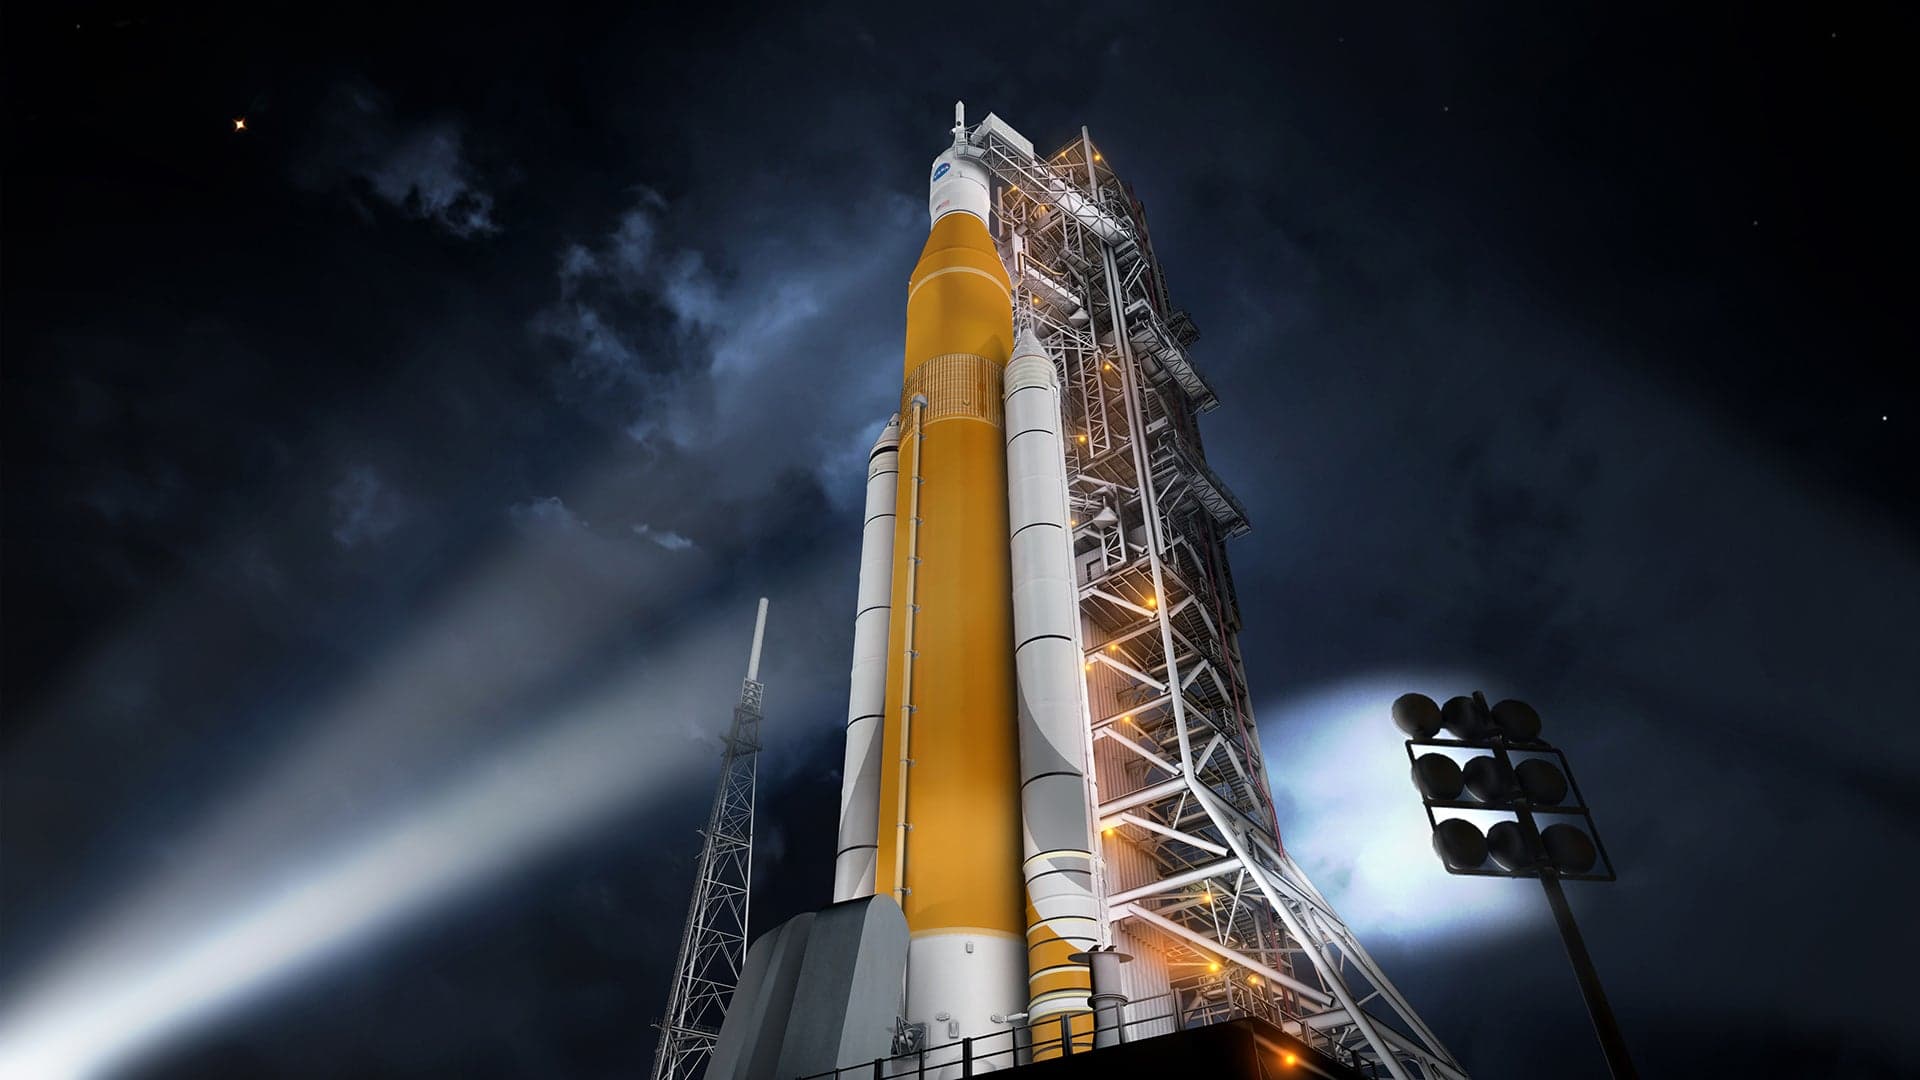 NASA May Put Astronauts on the Giant SLS Rocket’s First Flight—At Trump’s Request